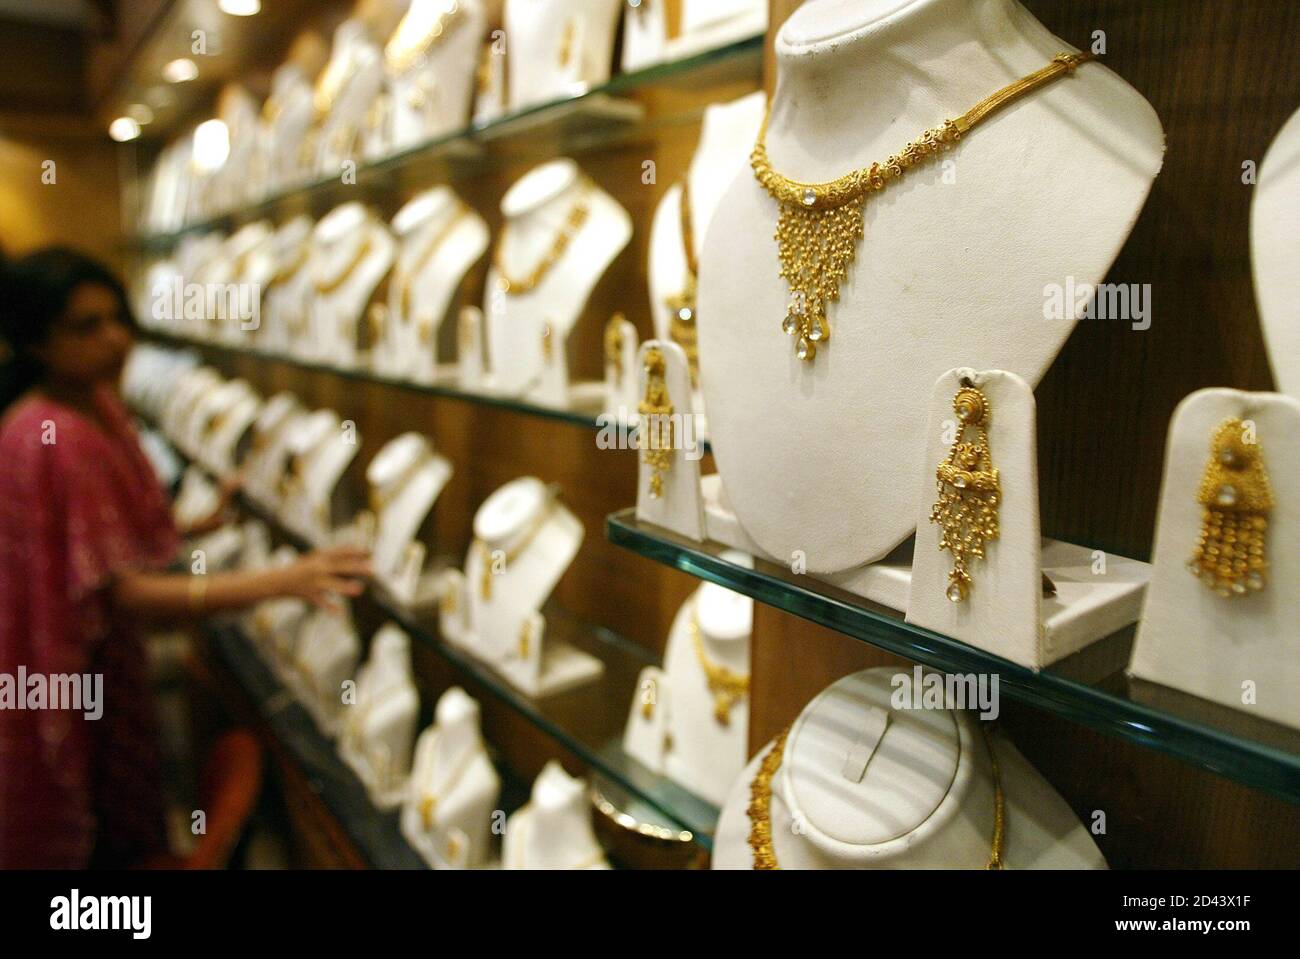 A saleswoman arranges gold jewellery at a shop in Bombay November 9, 2004.  Jewellery consumers, undeterred by gold's rise to a 16-year high, are  making last-minute purchases this week before religious festivals